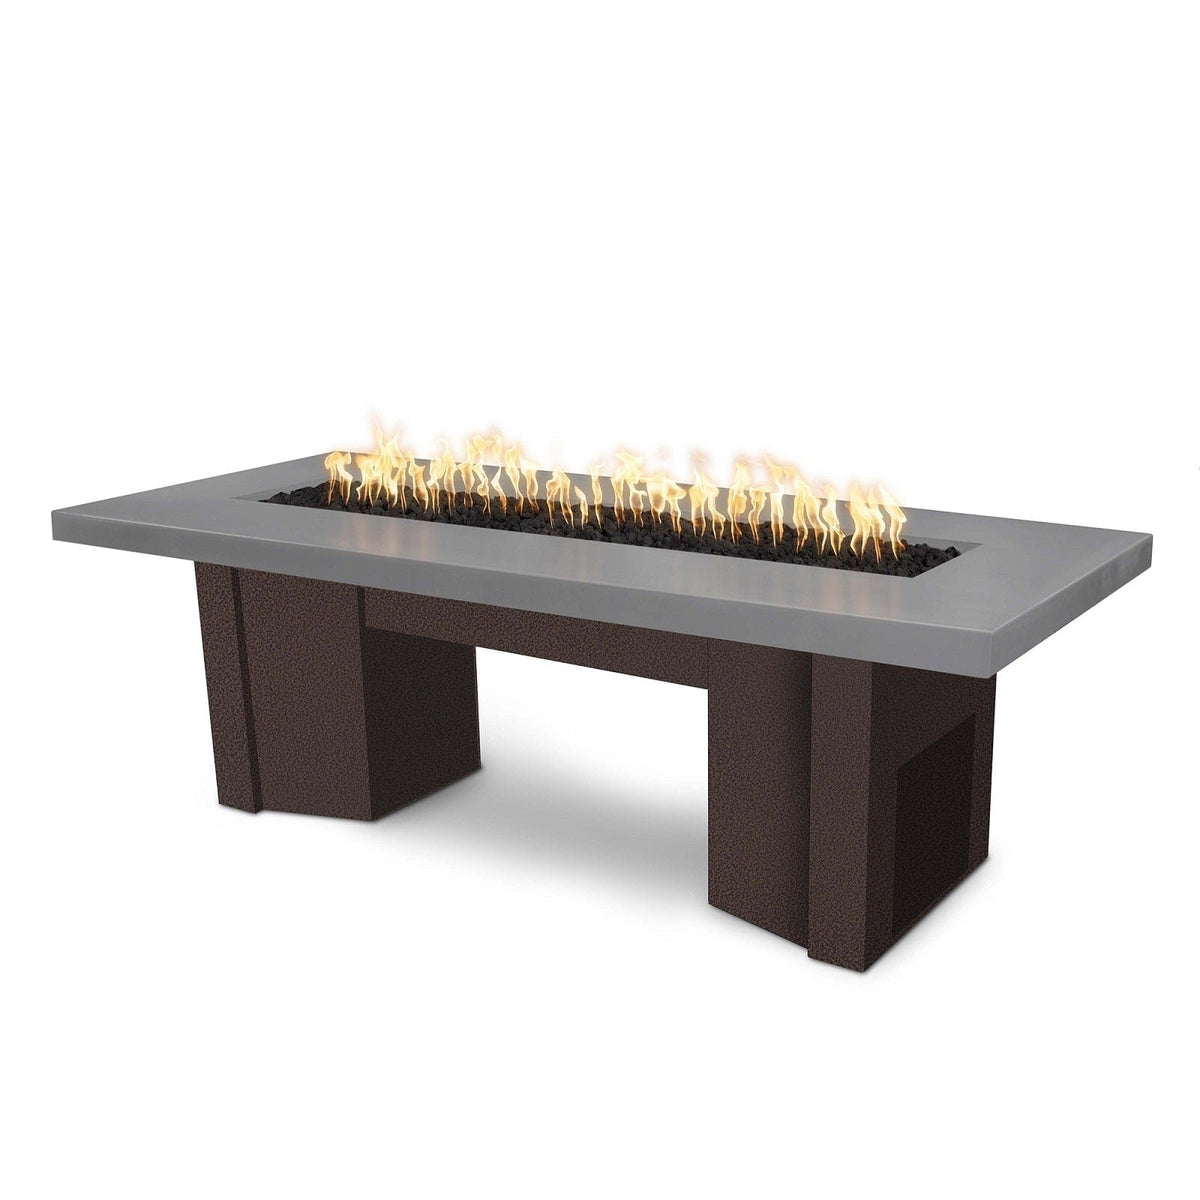 The Outdoor Plus Fire Features Natural Gray (-NGY) / Copper Vein Powder Coated Steel (-CPV) The Outdoor Plus 78&quot; Alameda Fire Table Smooth Concrete in Liquid Propane - 12V Electronic Ignition / OPT-ALMGFRC78E12V-LP